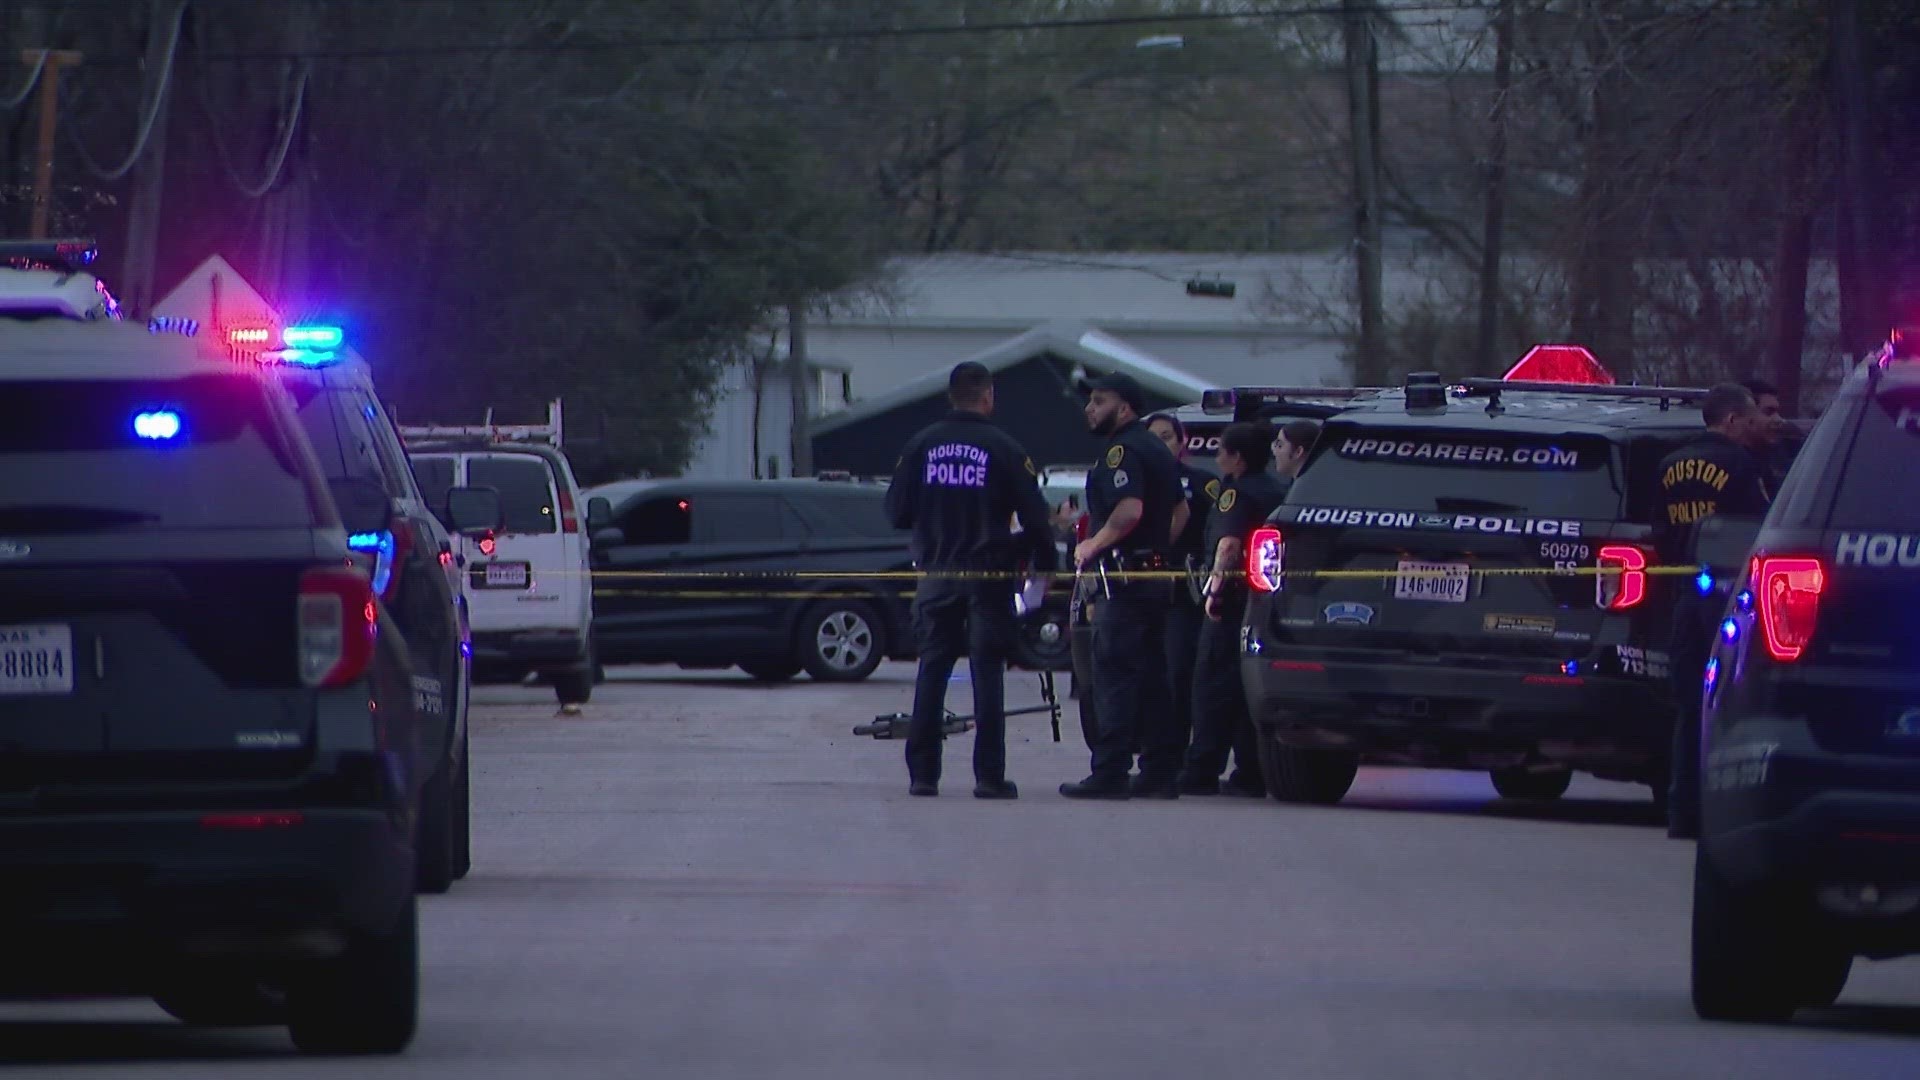 Houston police said an officer shot and killed a robbery suspect in Houston's East End.